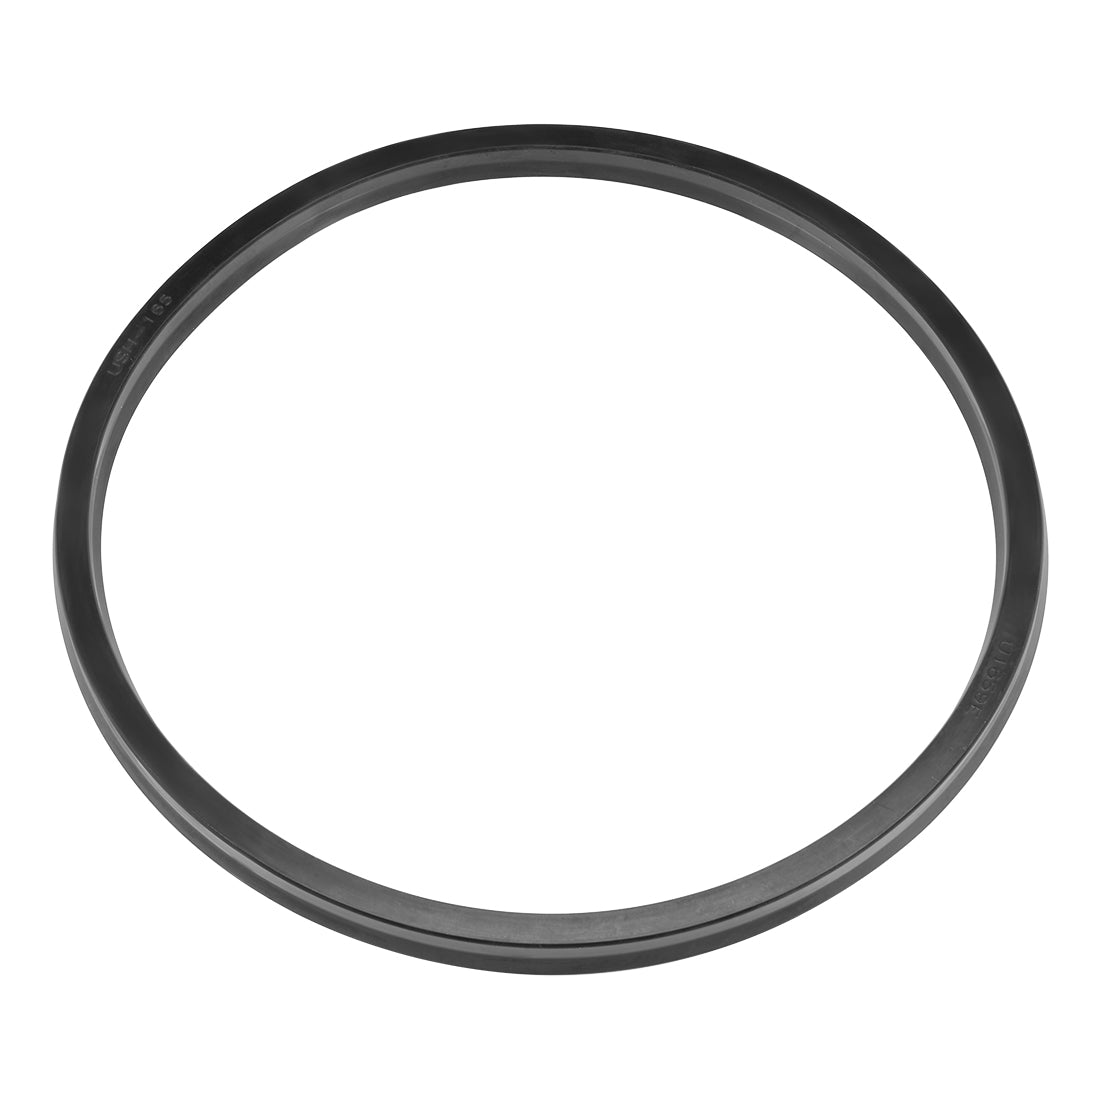 uxcell Uxcell Hydraulic Seal, Piston Shaft USH Oil Sealing O-Ring, 165mm x 180mm x 9mm